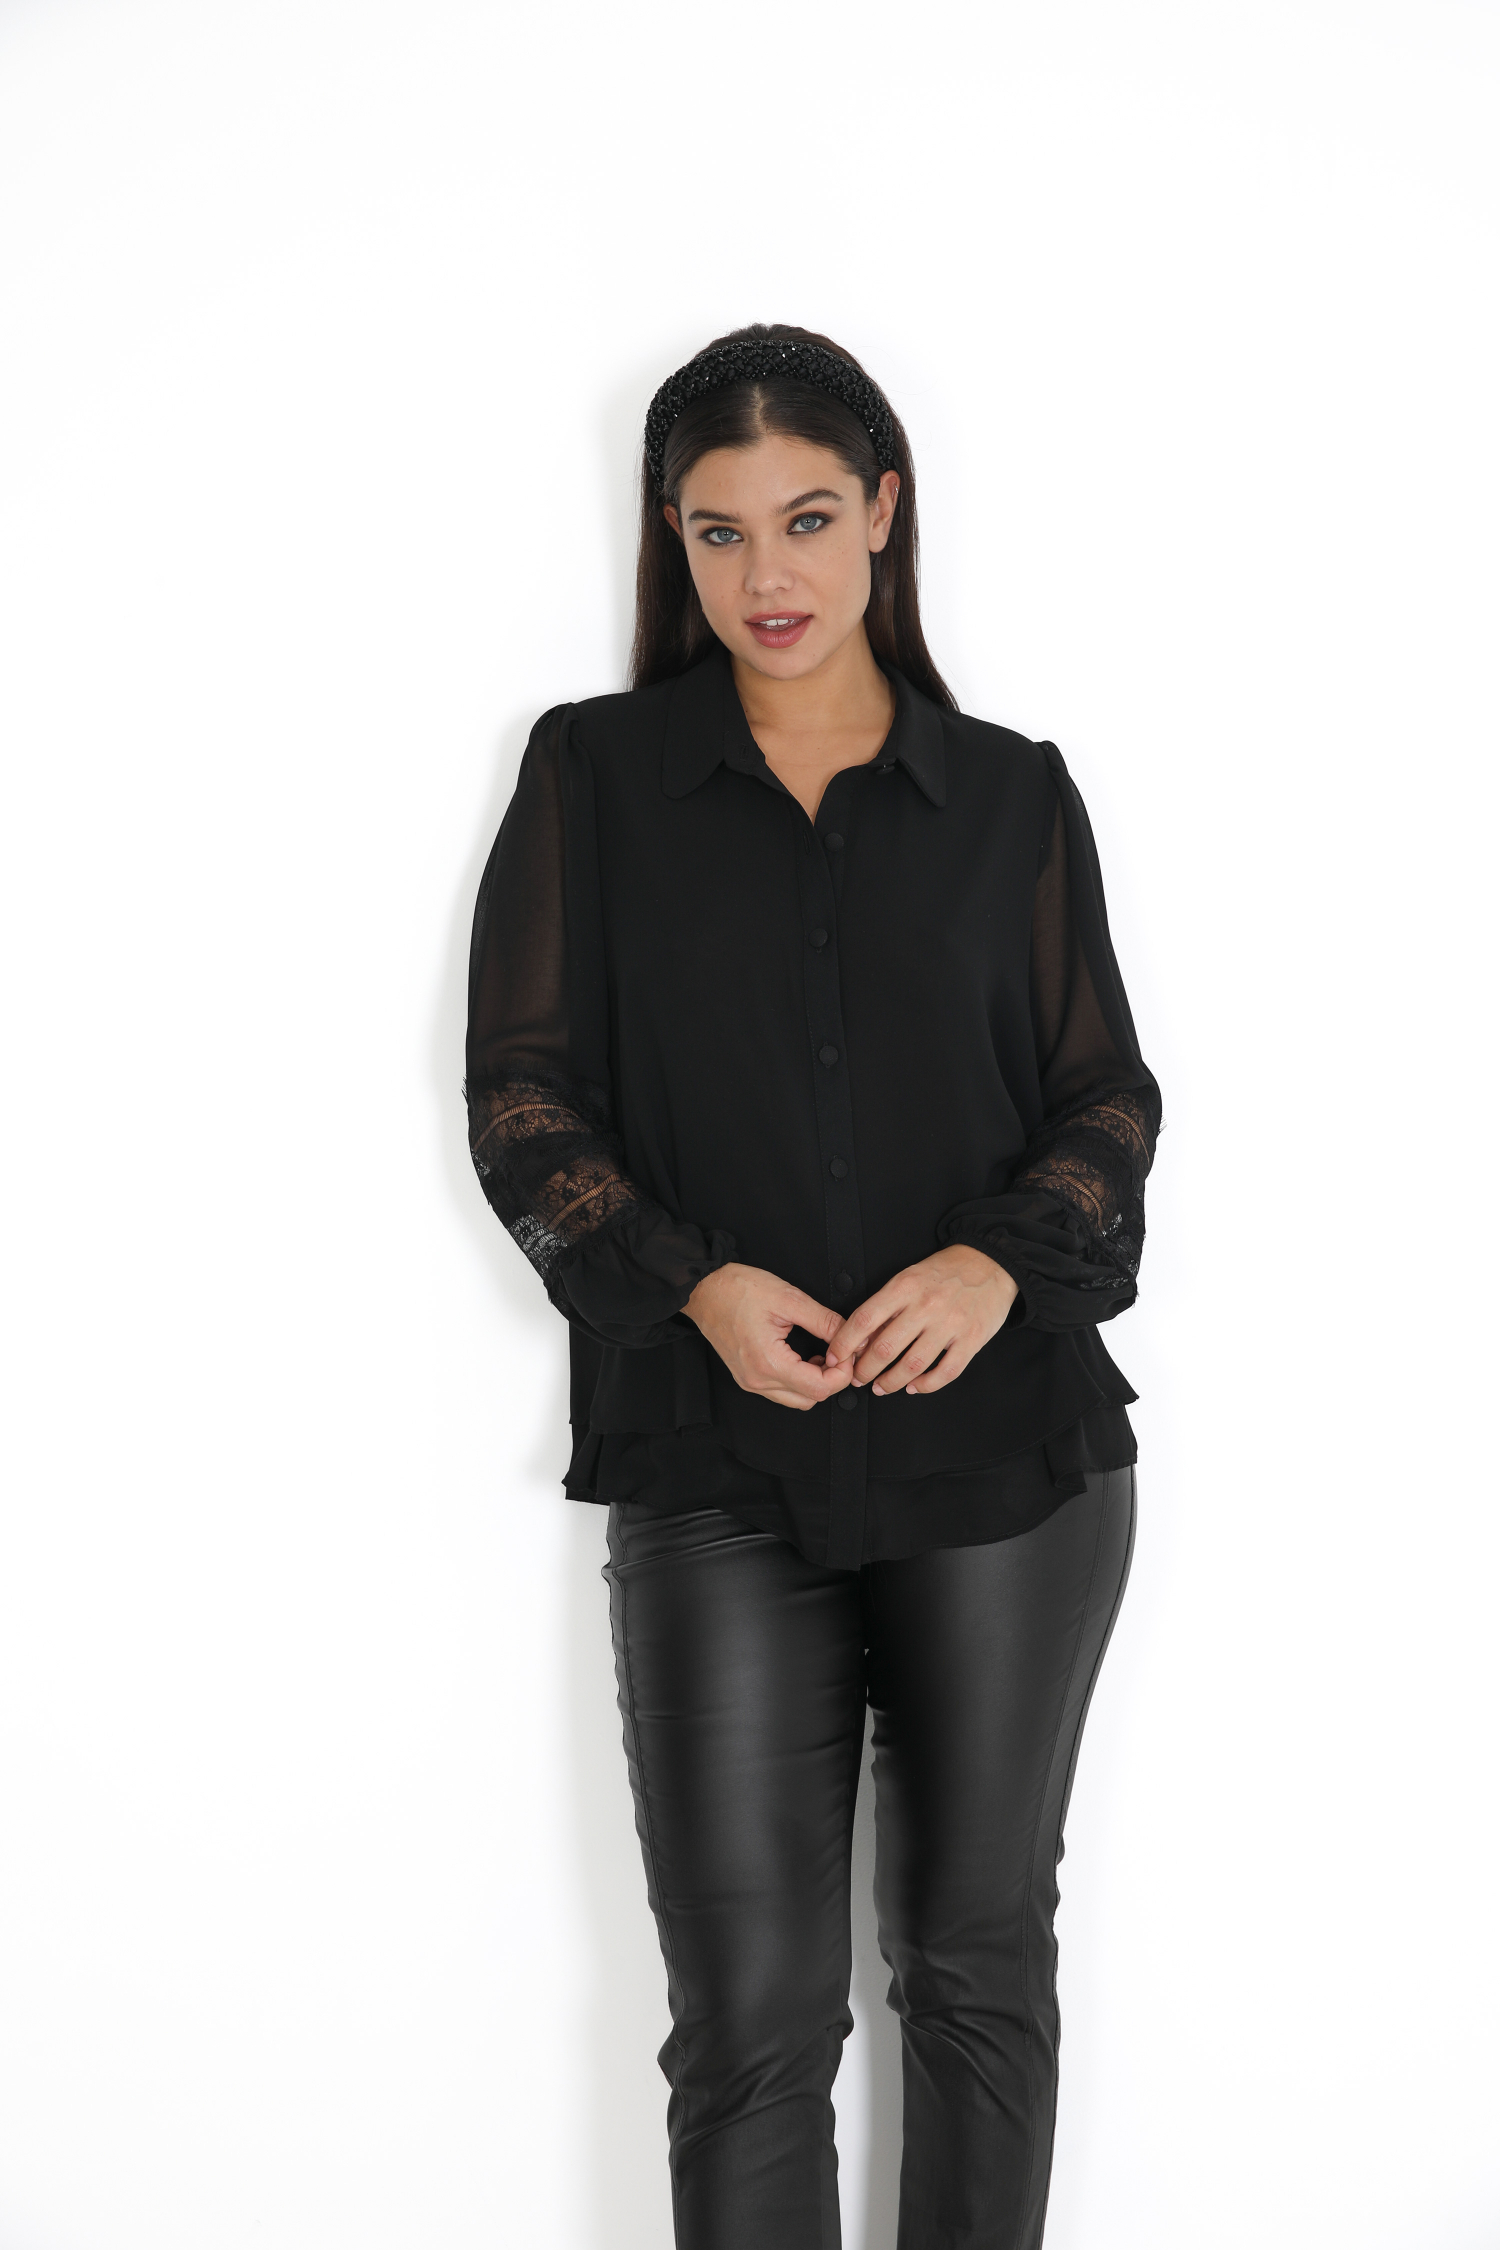 Double voile shirt with lace